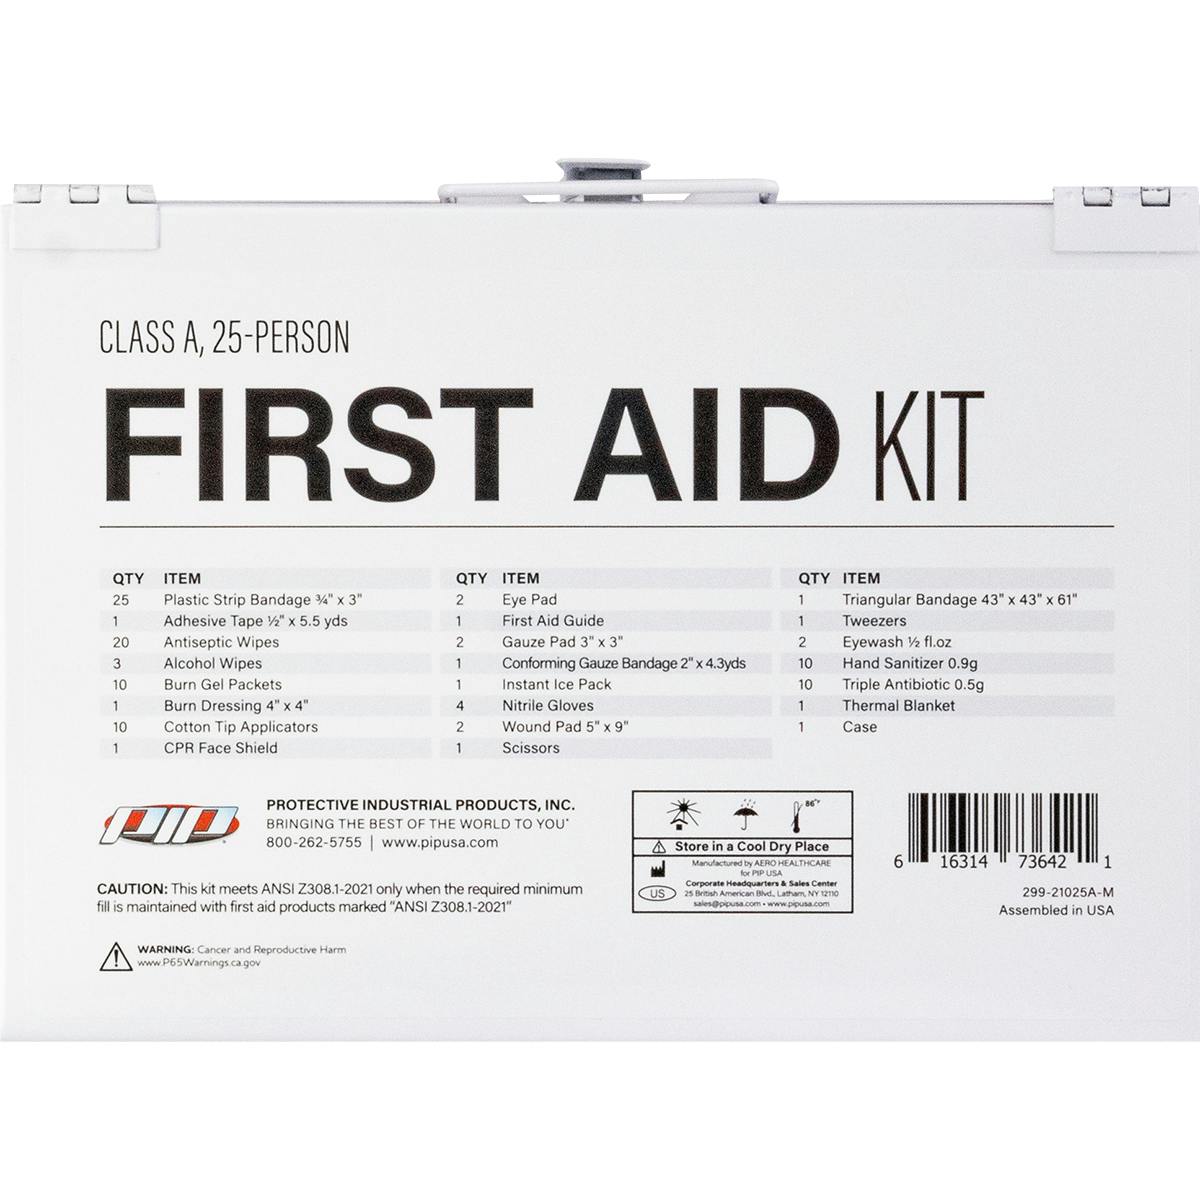 ANSI Class A Waterproof First Aid Kit - 25 Person, White (299-21025A-M) - KIT